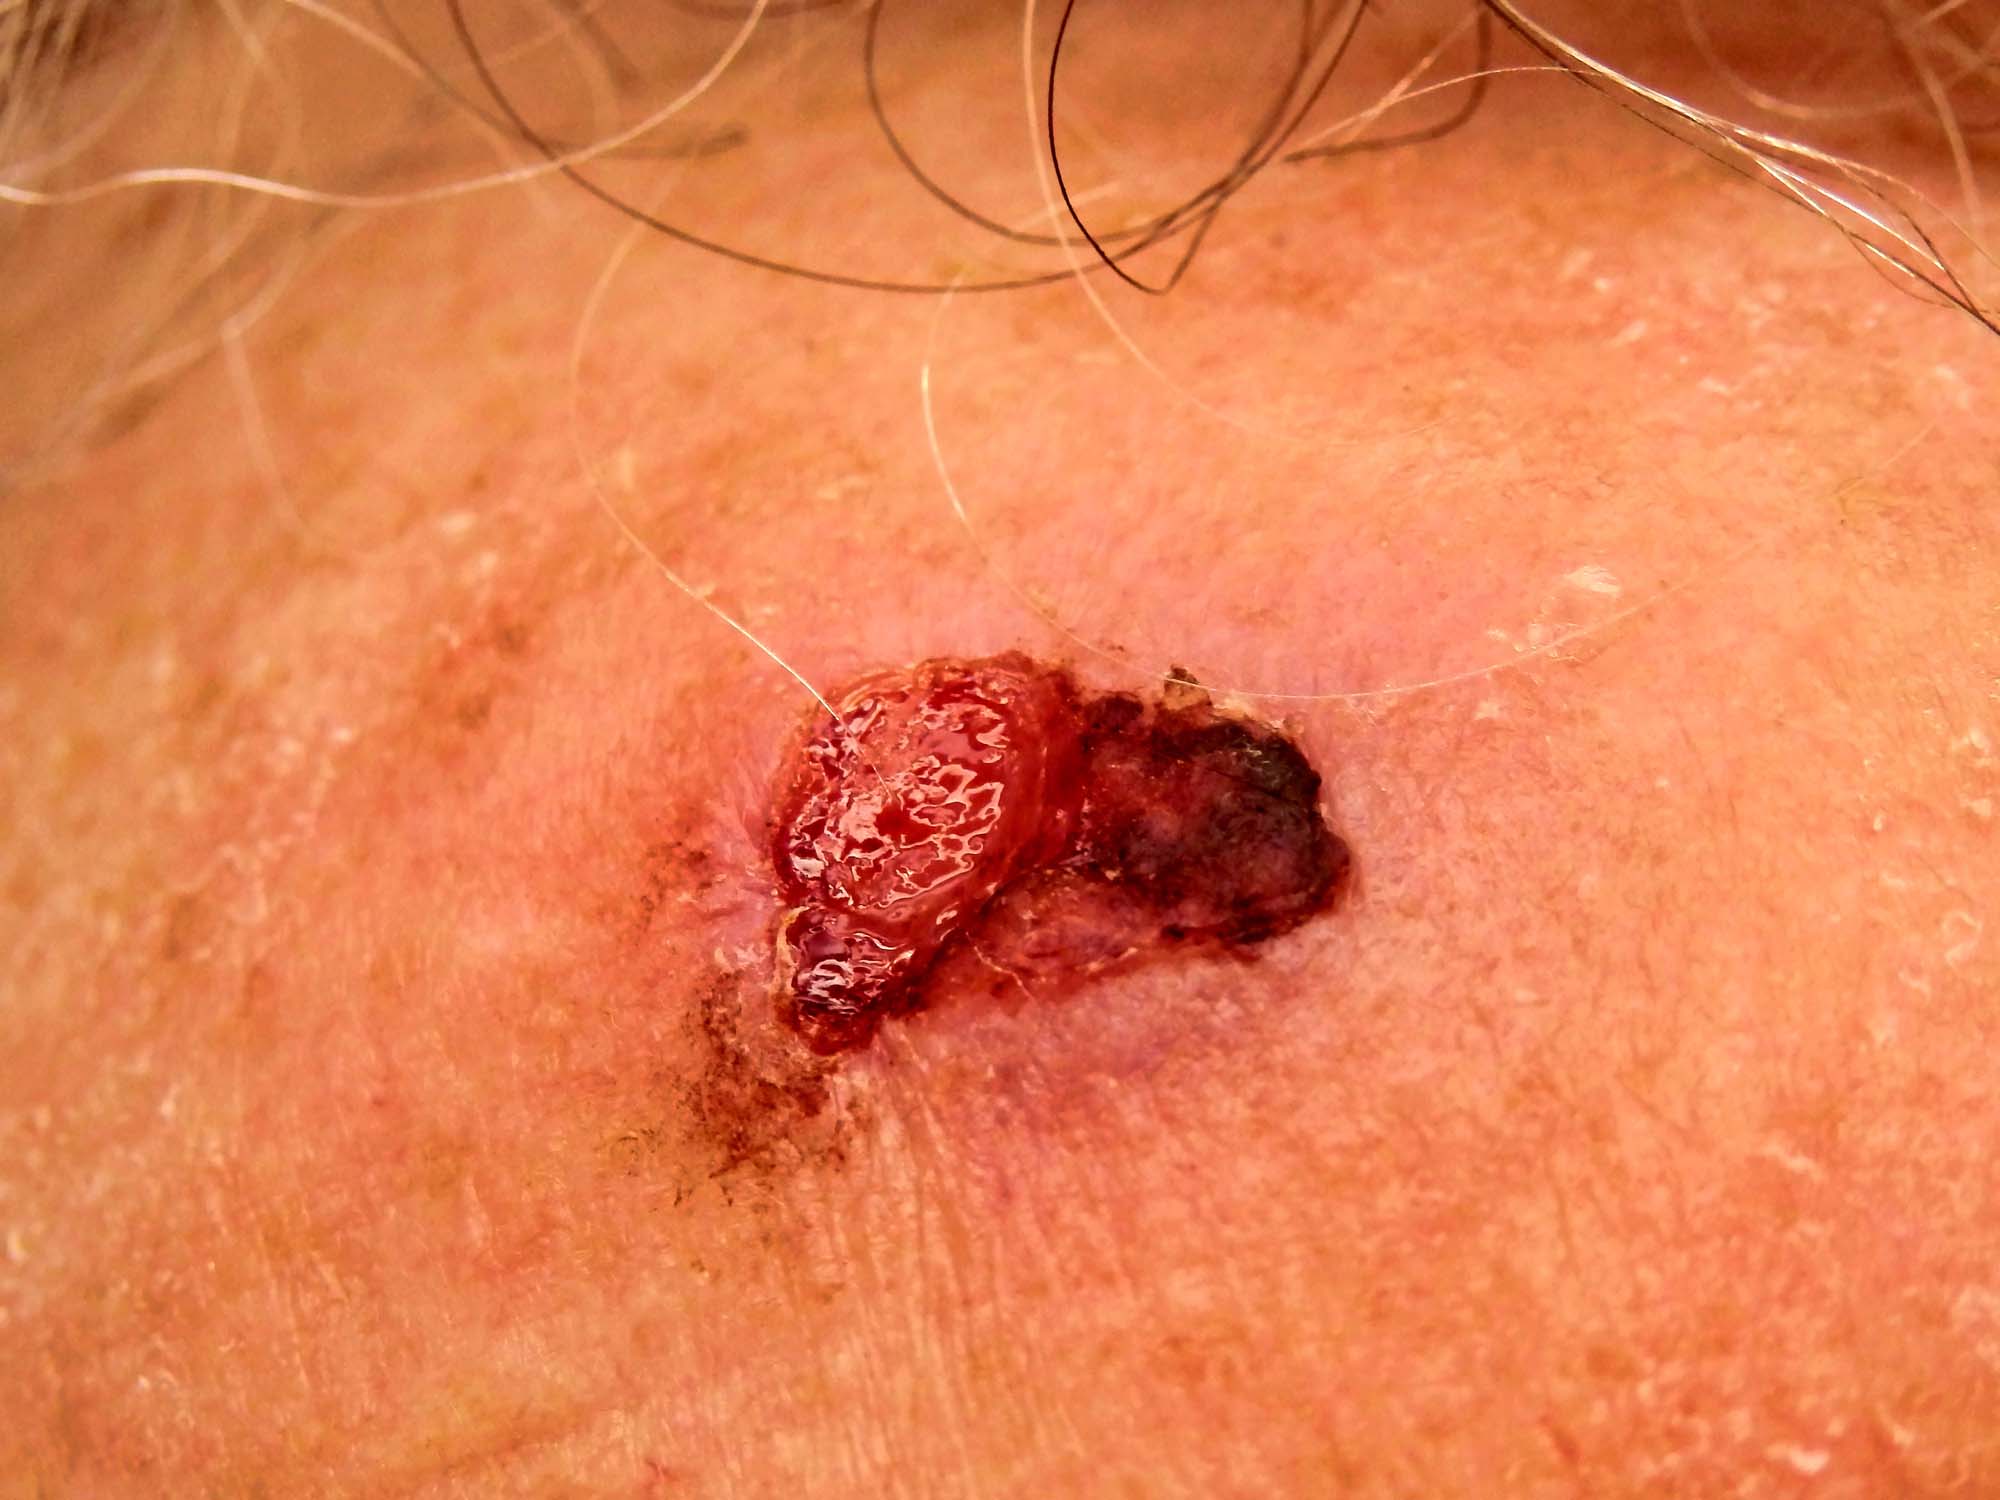 Squamous Cell Carcinoma Treatment in Monroe, LA and Southlake, TX